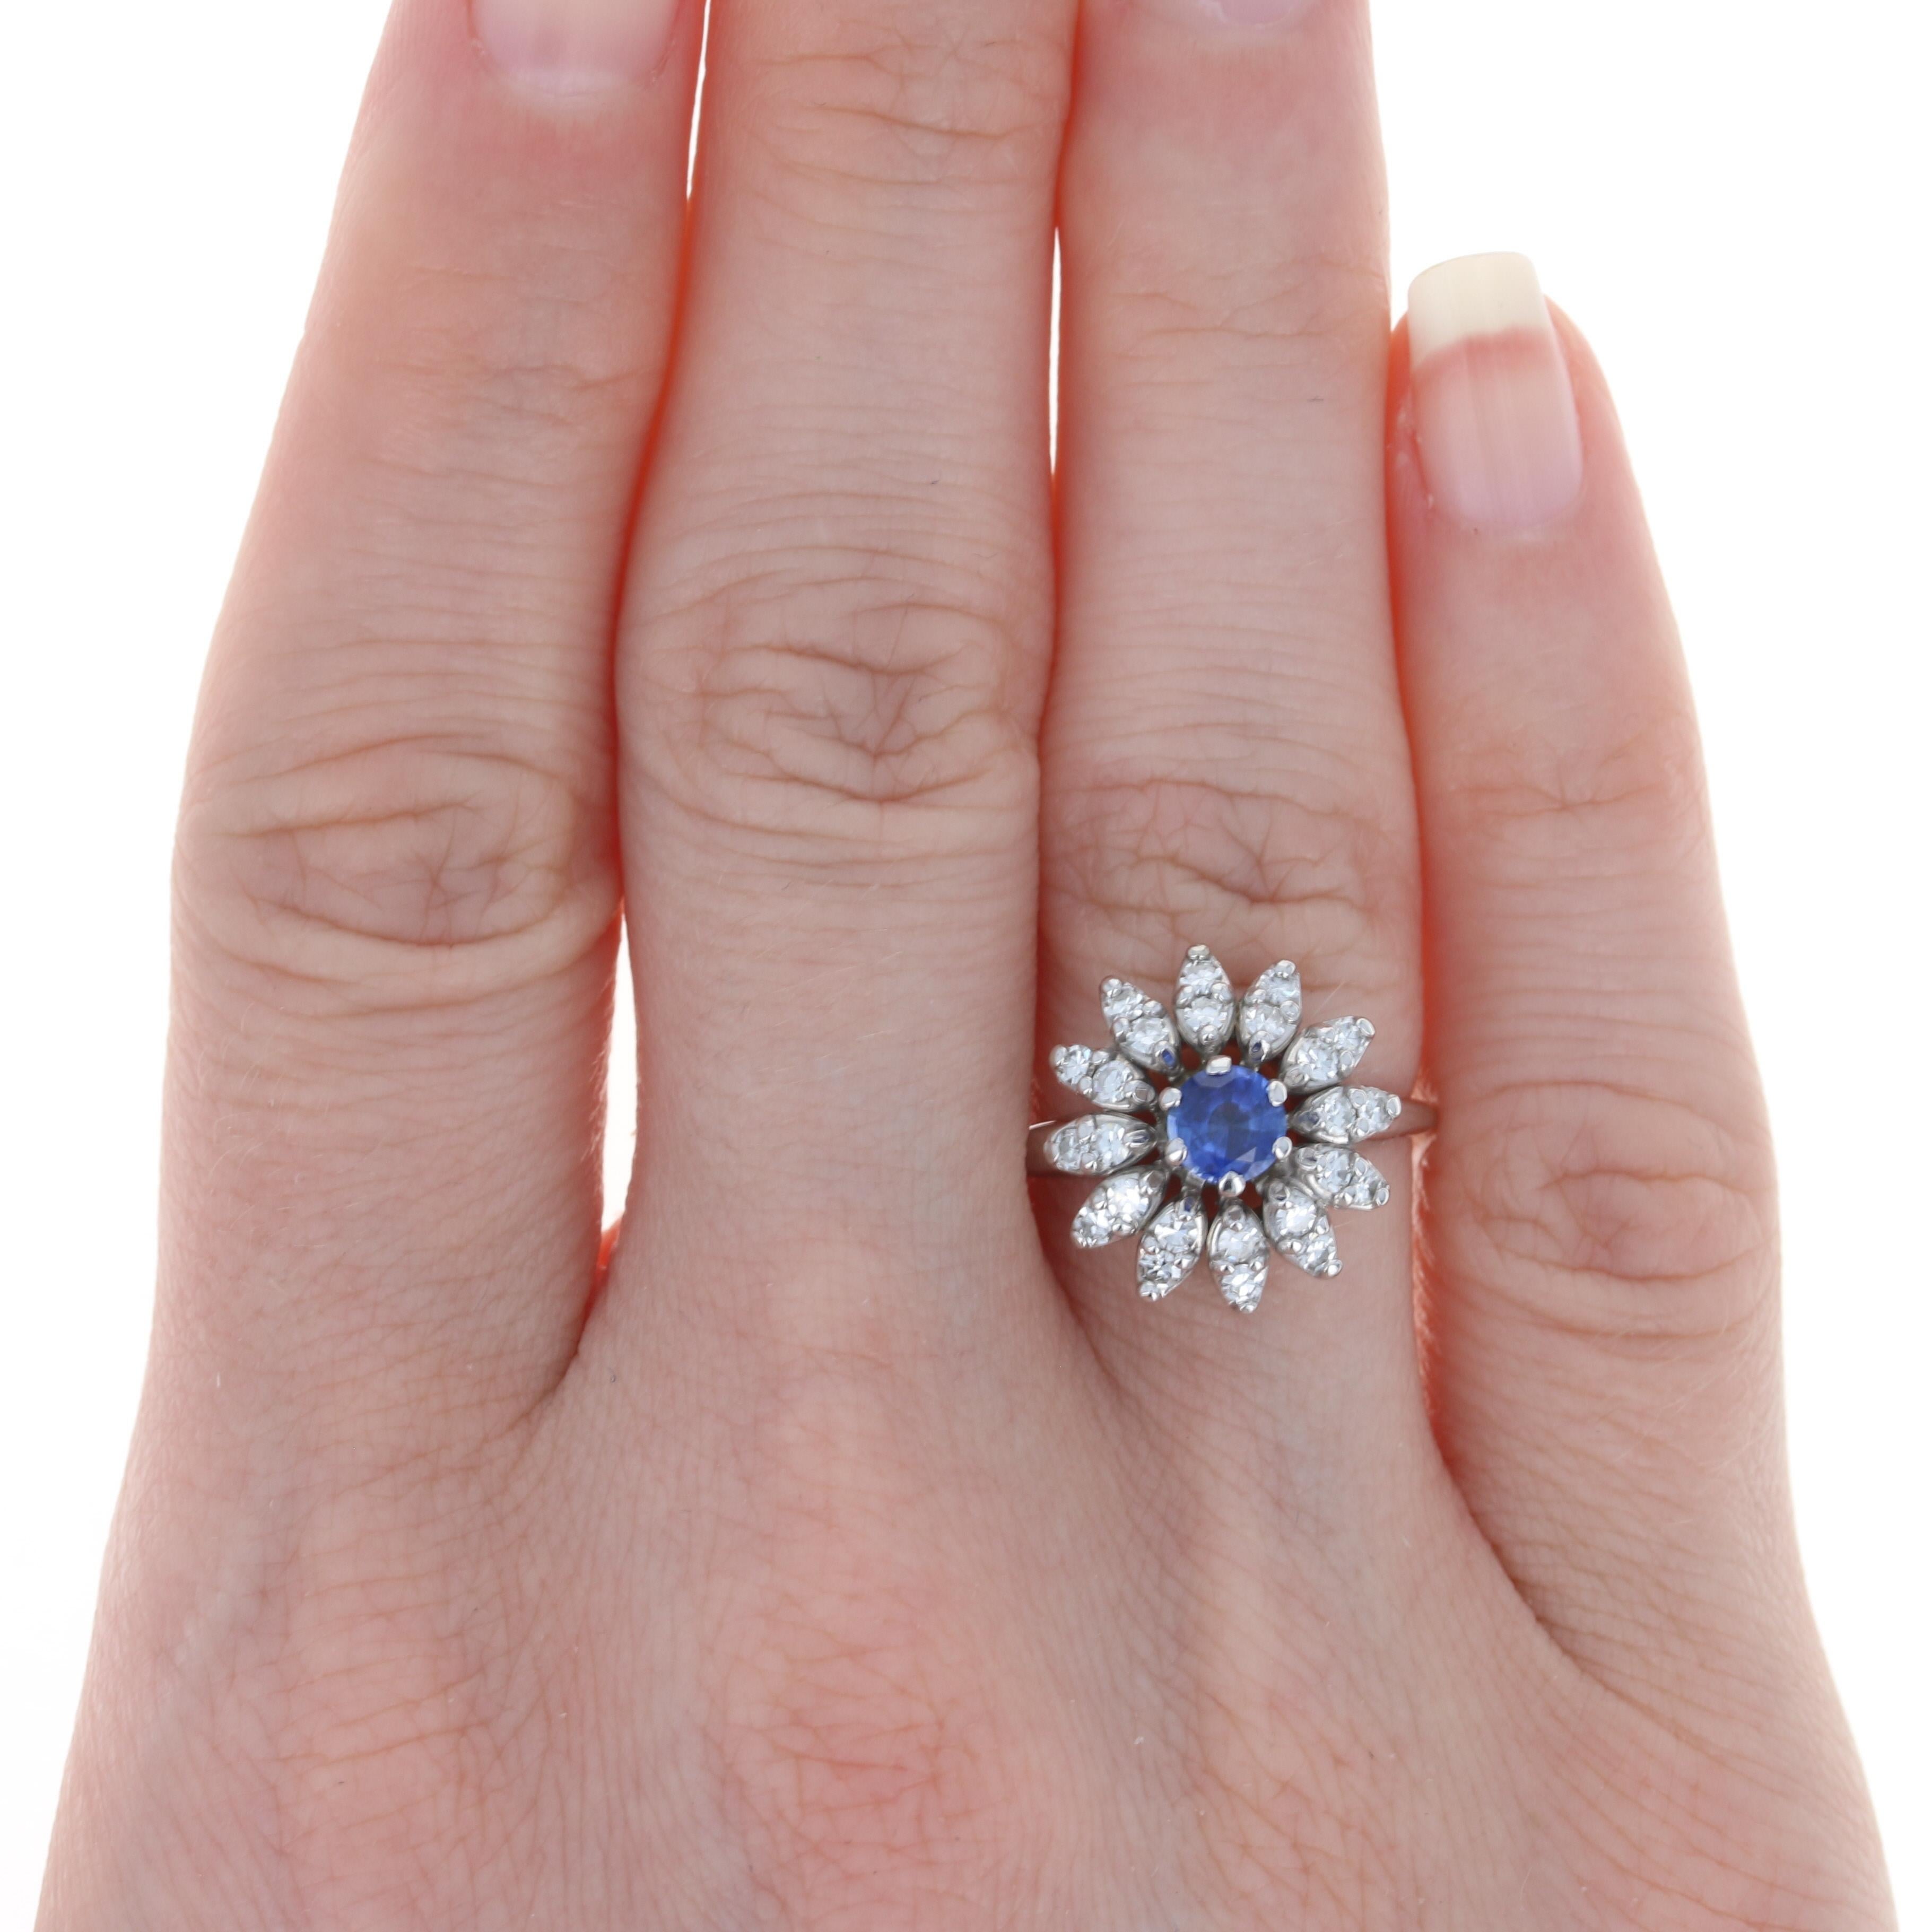 Size: 6 1/2
 Sizing Fee: Up 2 sizes for $25 or down 2 sizes for $20
 
 Era: Vintage
 
 Metal Content: 14k White Gold 
 
 Stone Information: 
 Genuine Sapphire
 Treatment: Heating
 Carat: .50ct
 Cut: Round
 Color: Blue
 Diameter: 4.8mm
 
 Natural